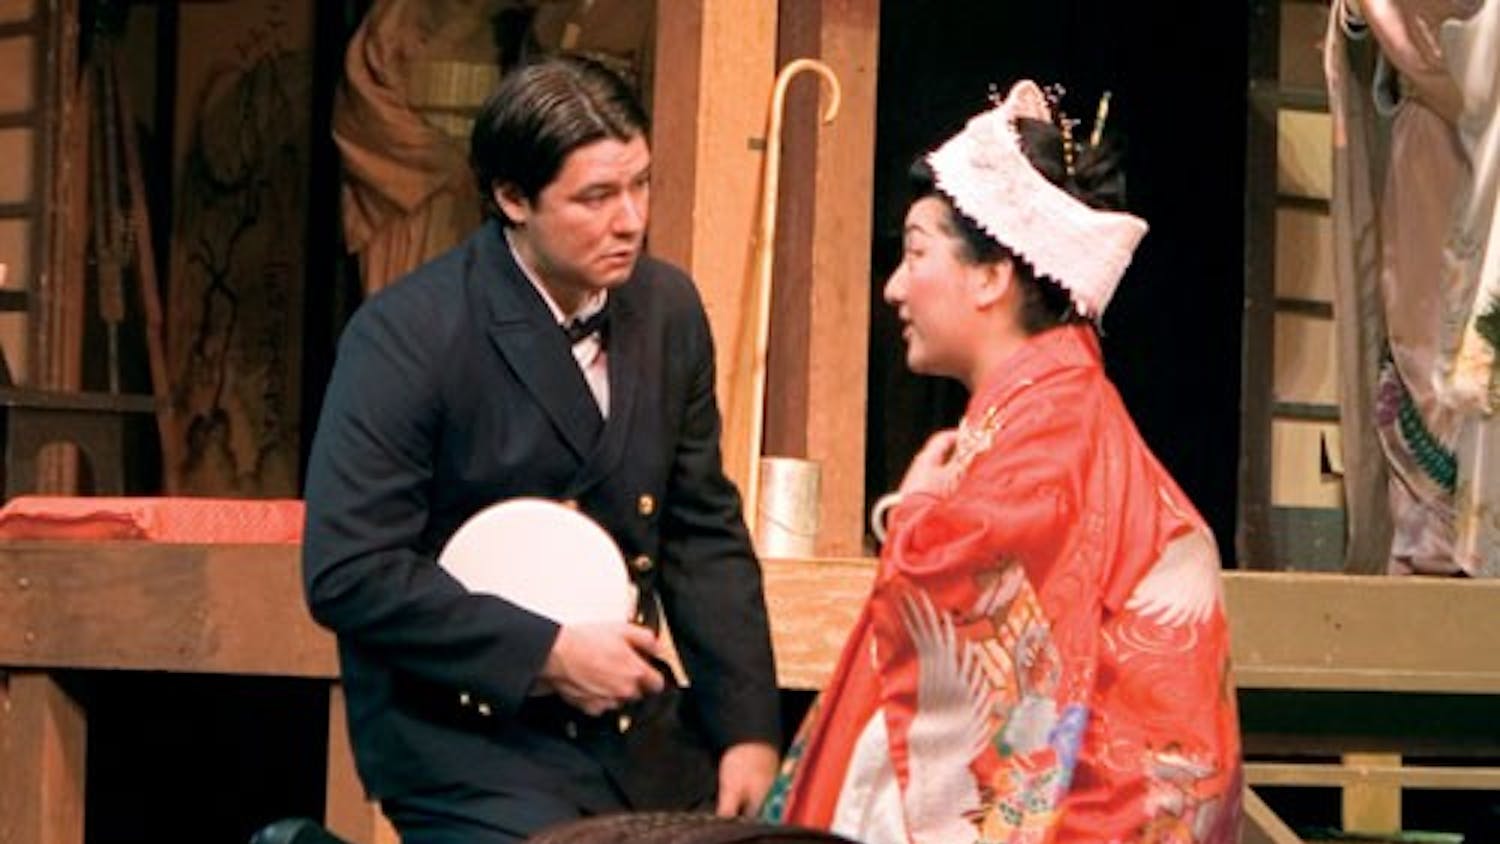 Lt. B. F. Pinkerton, U.S.N., played by Adam Diegel and Cio-Cio San (Madama Butterfly) played by Jing Zhang, perform during the dress rehearsal for Madama Butterfly Tuesday evening at the MAC. 